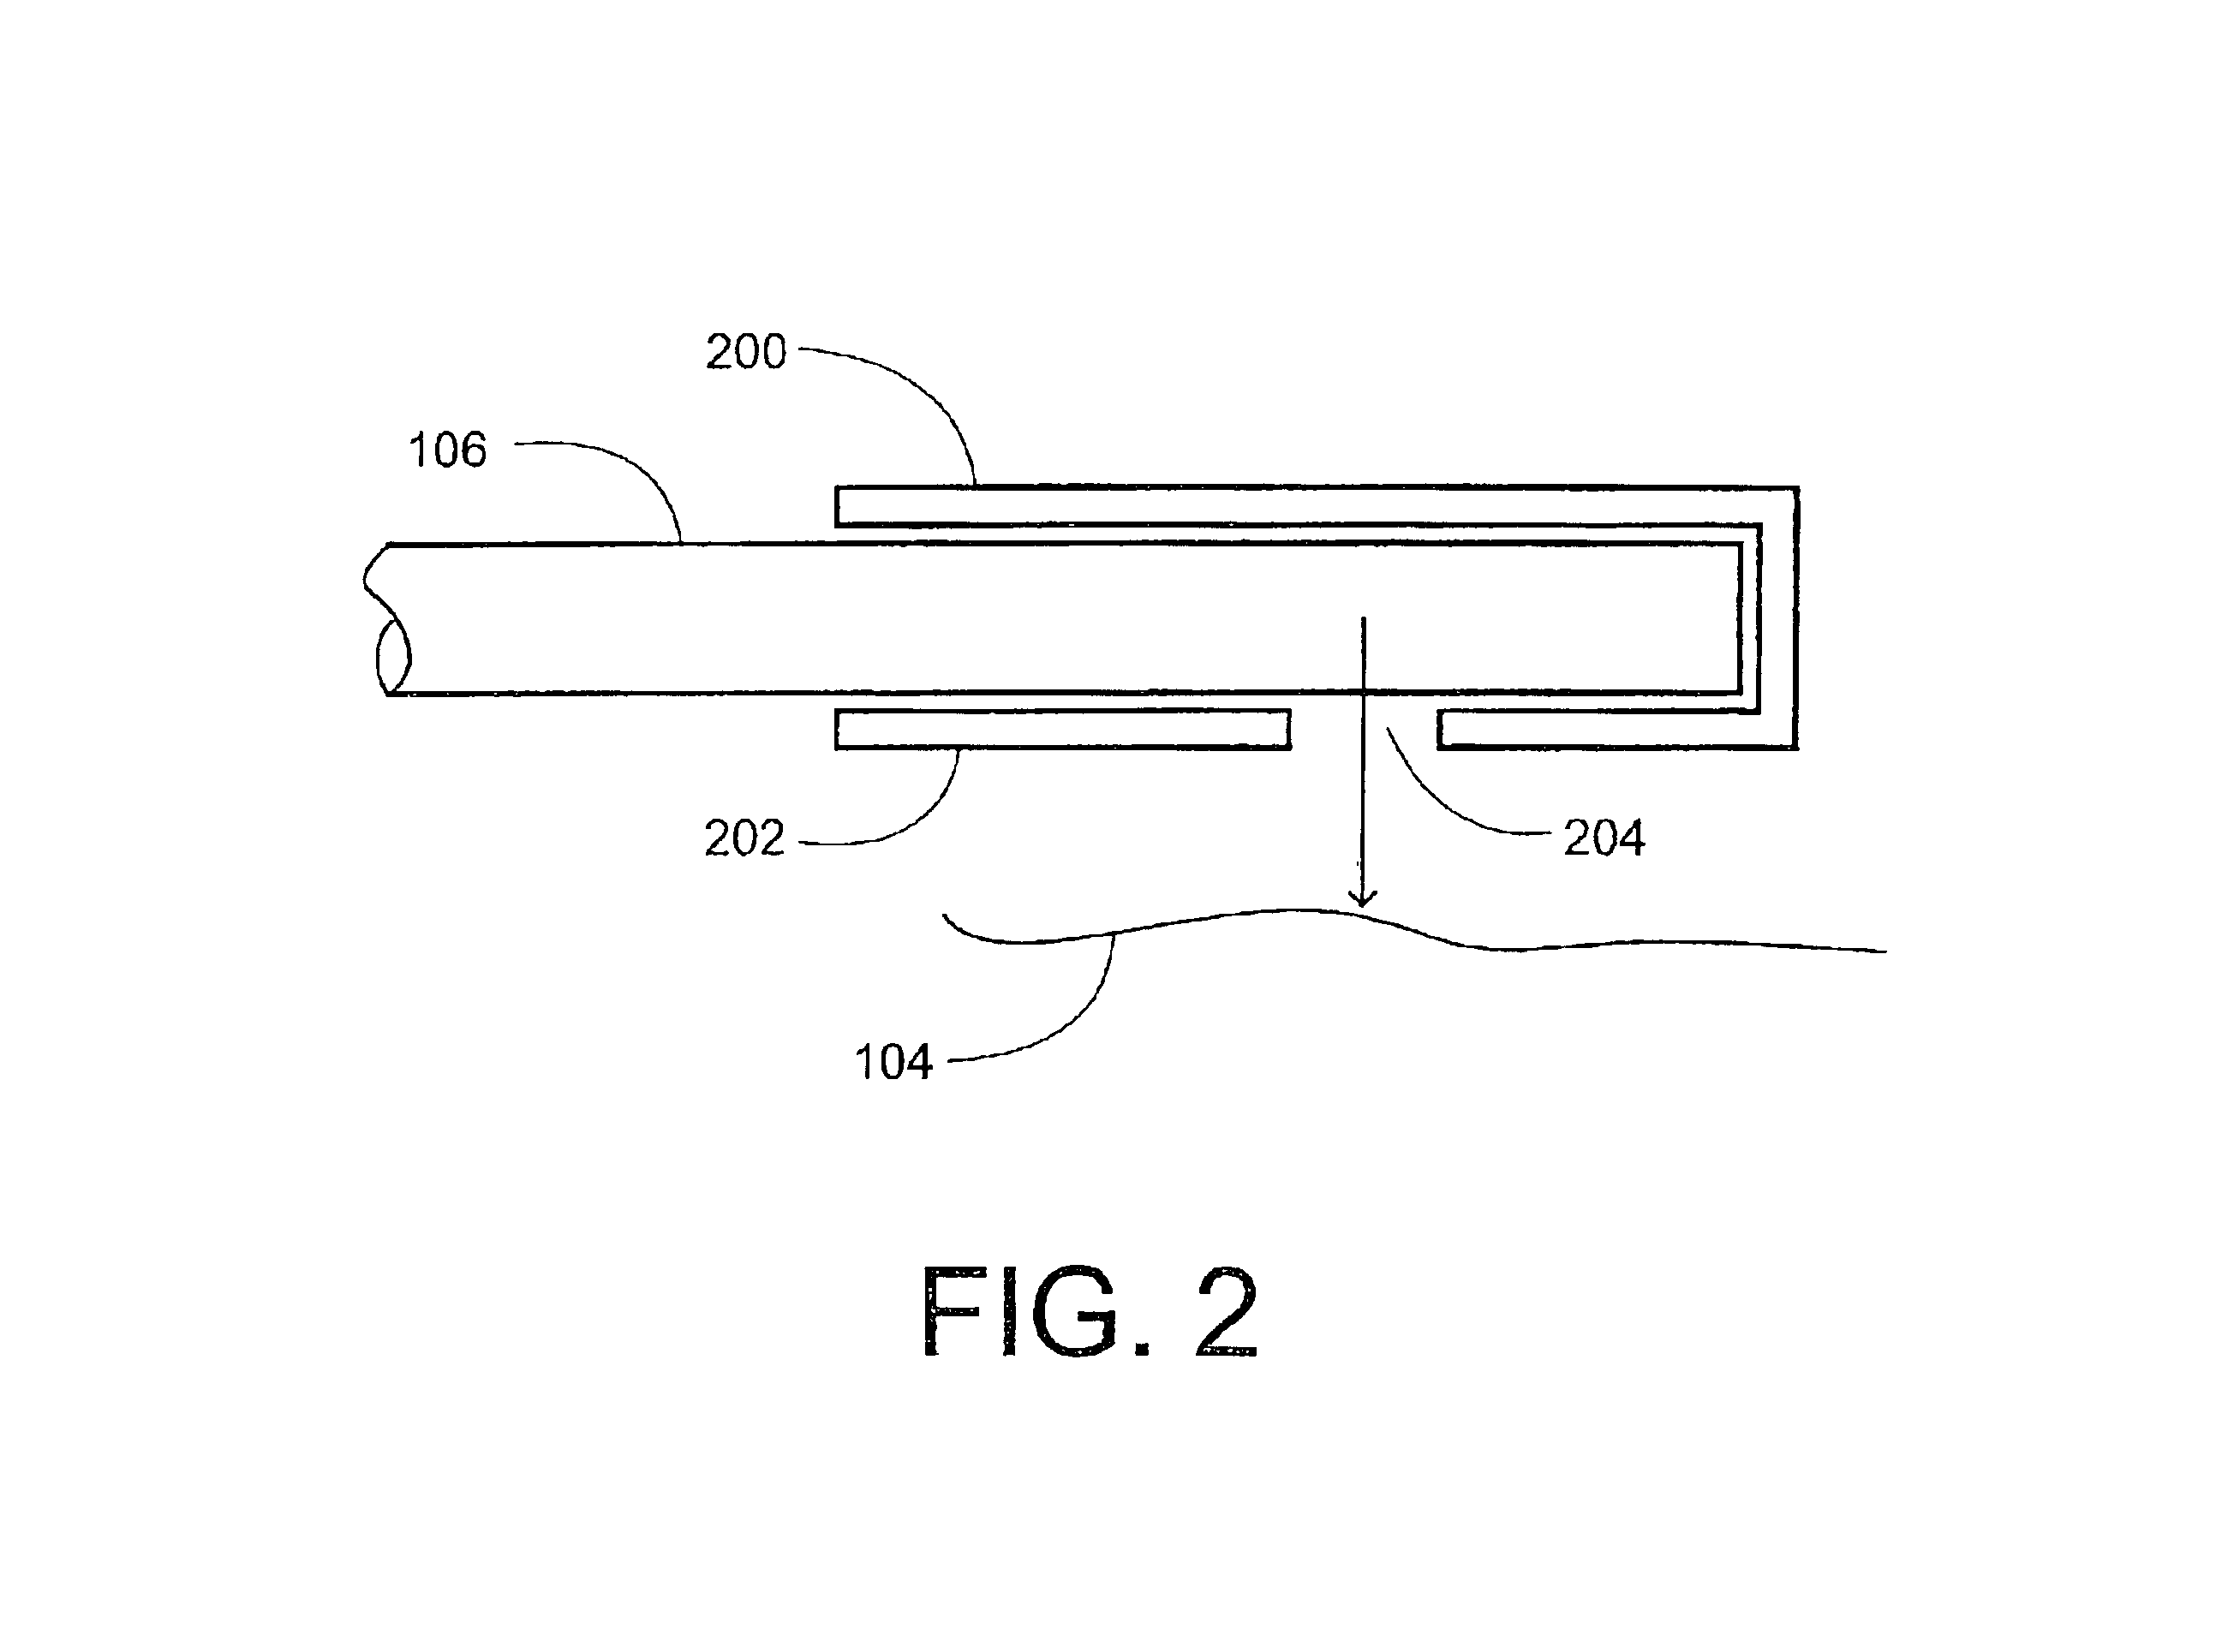 Method and system for photoselective vaporization of the prostate, and other tissue